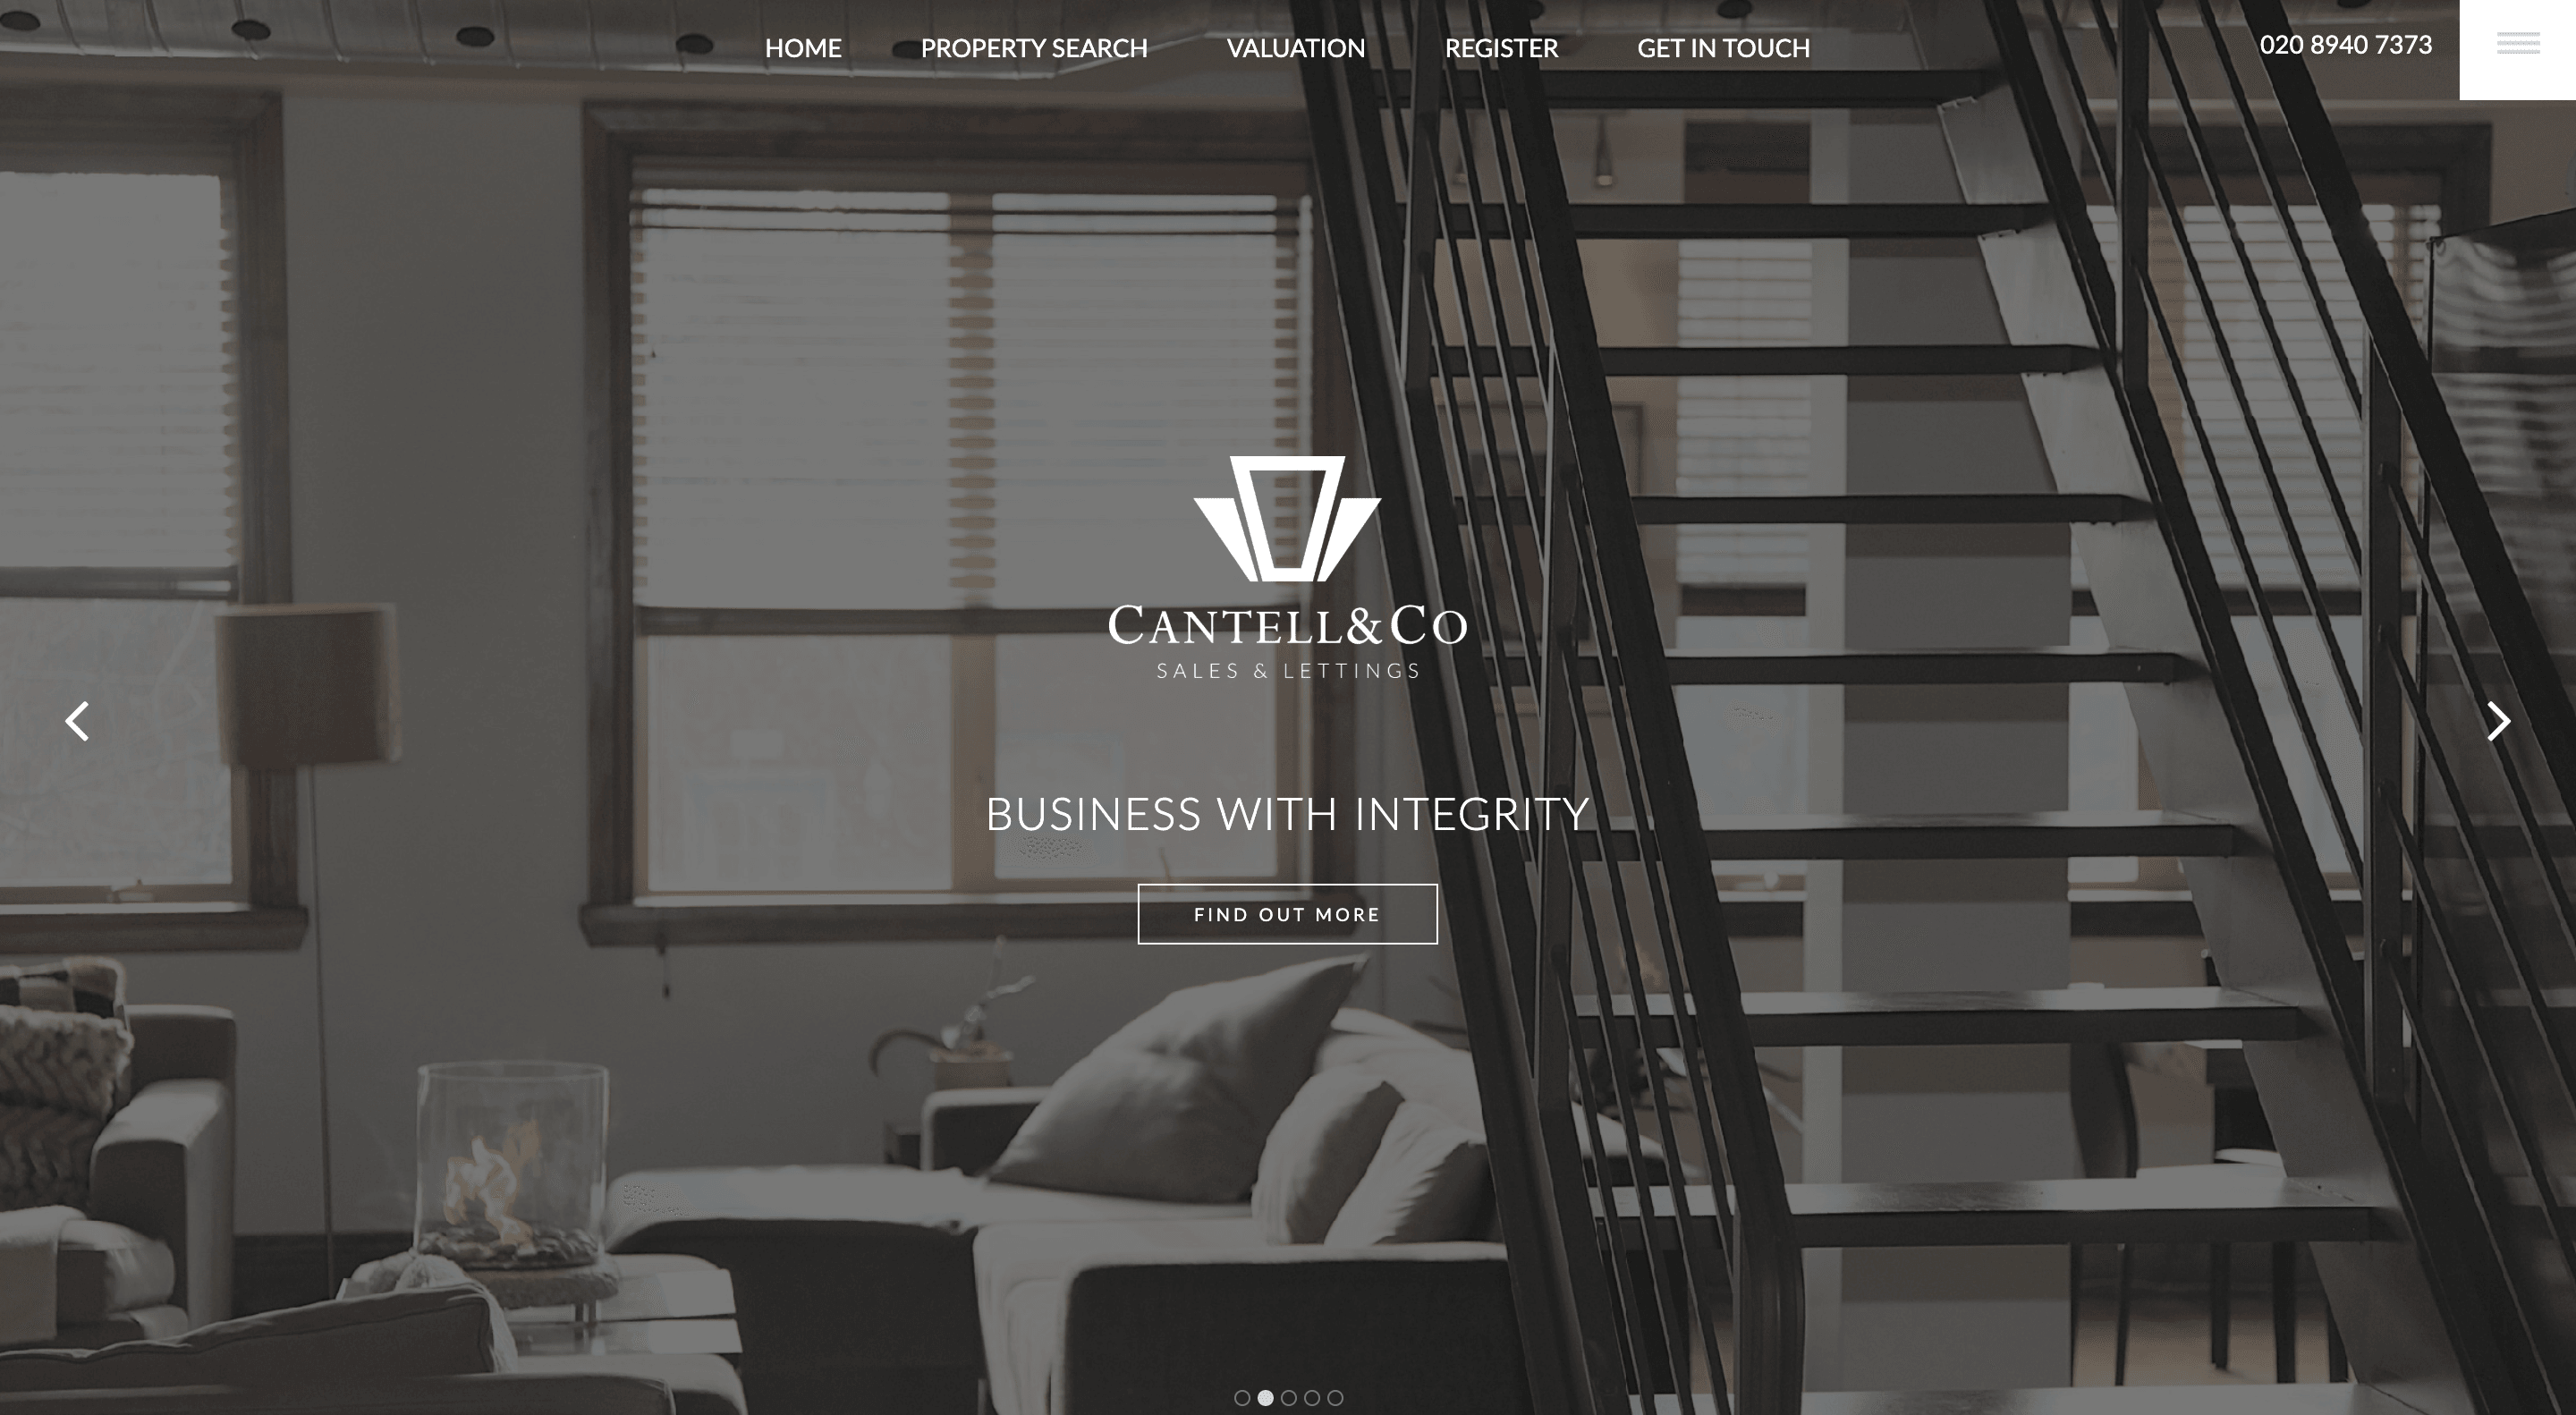 Cantell and Co estate agency website screenshot